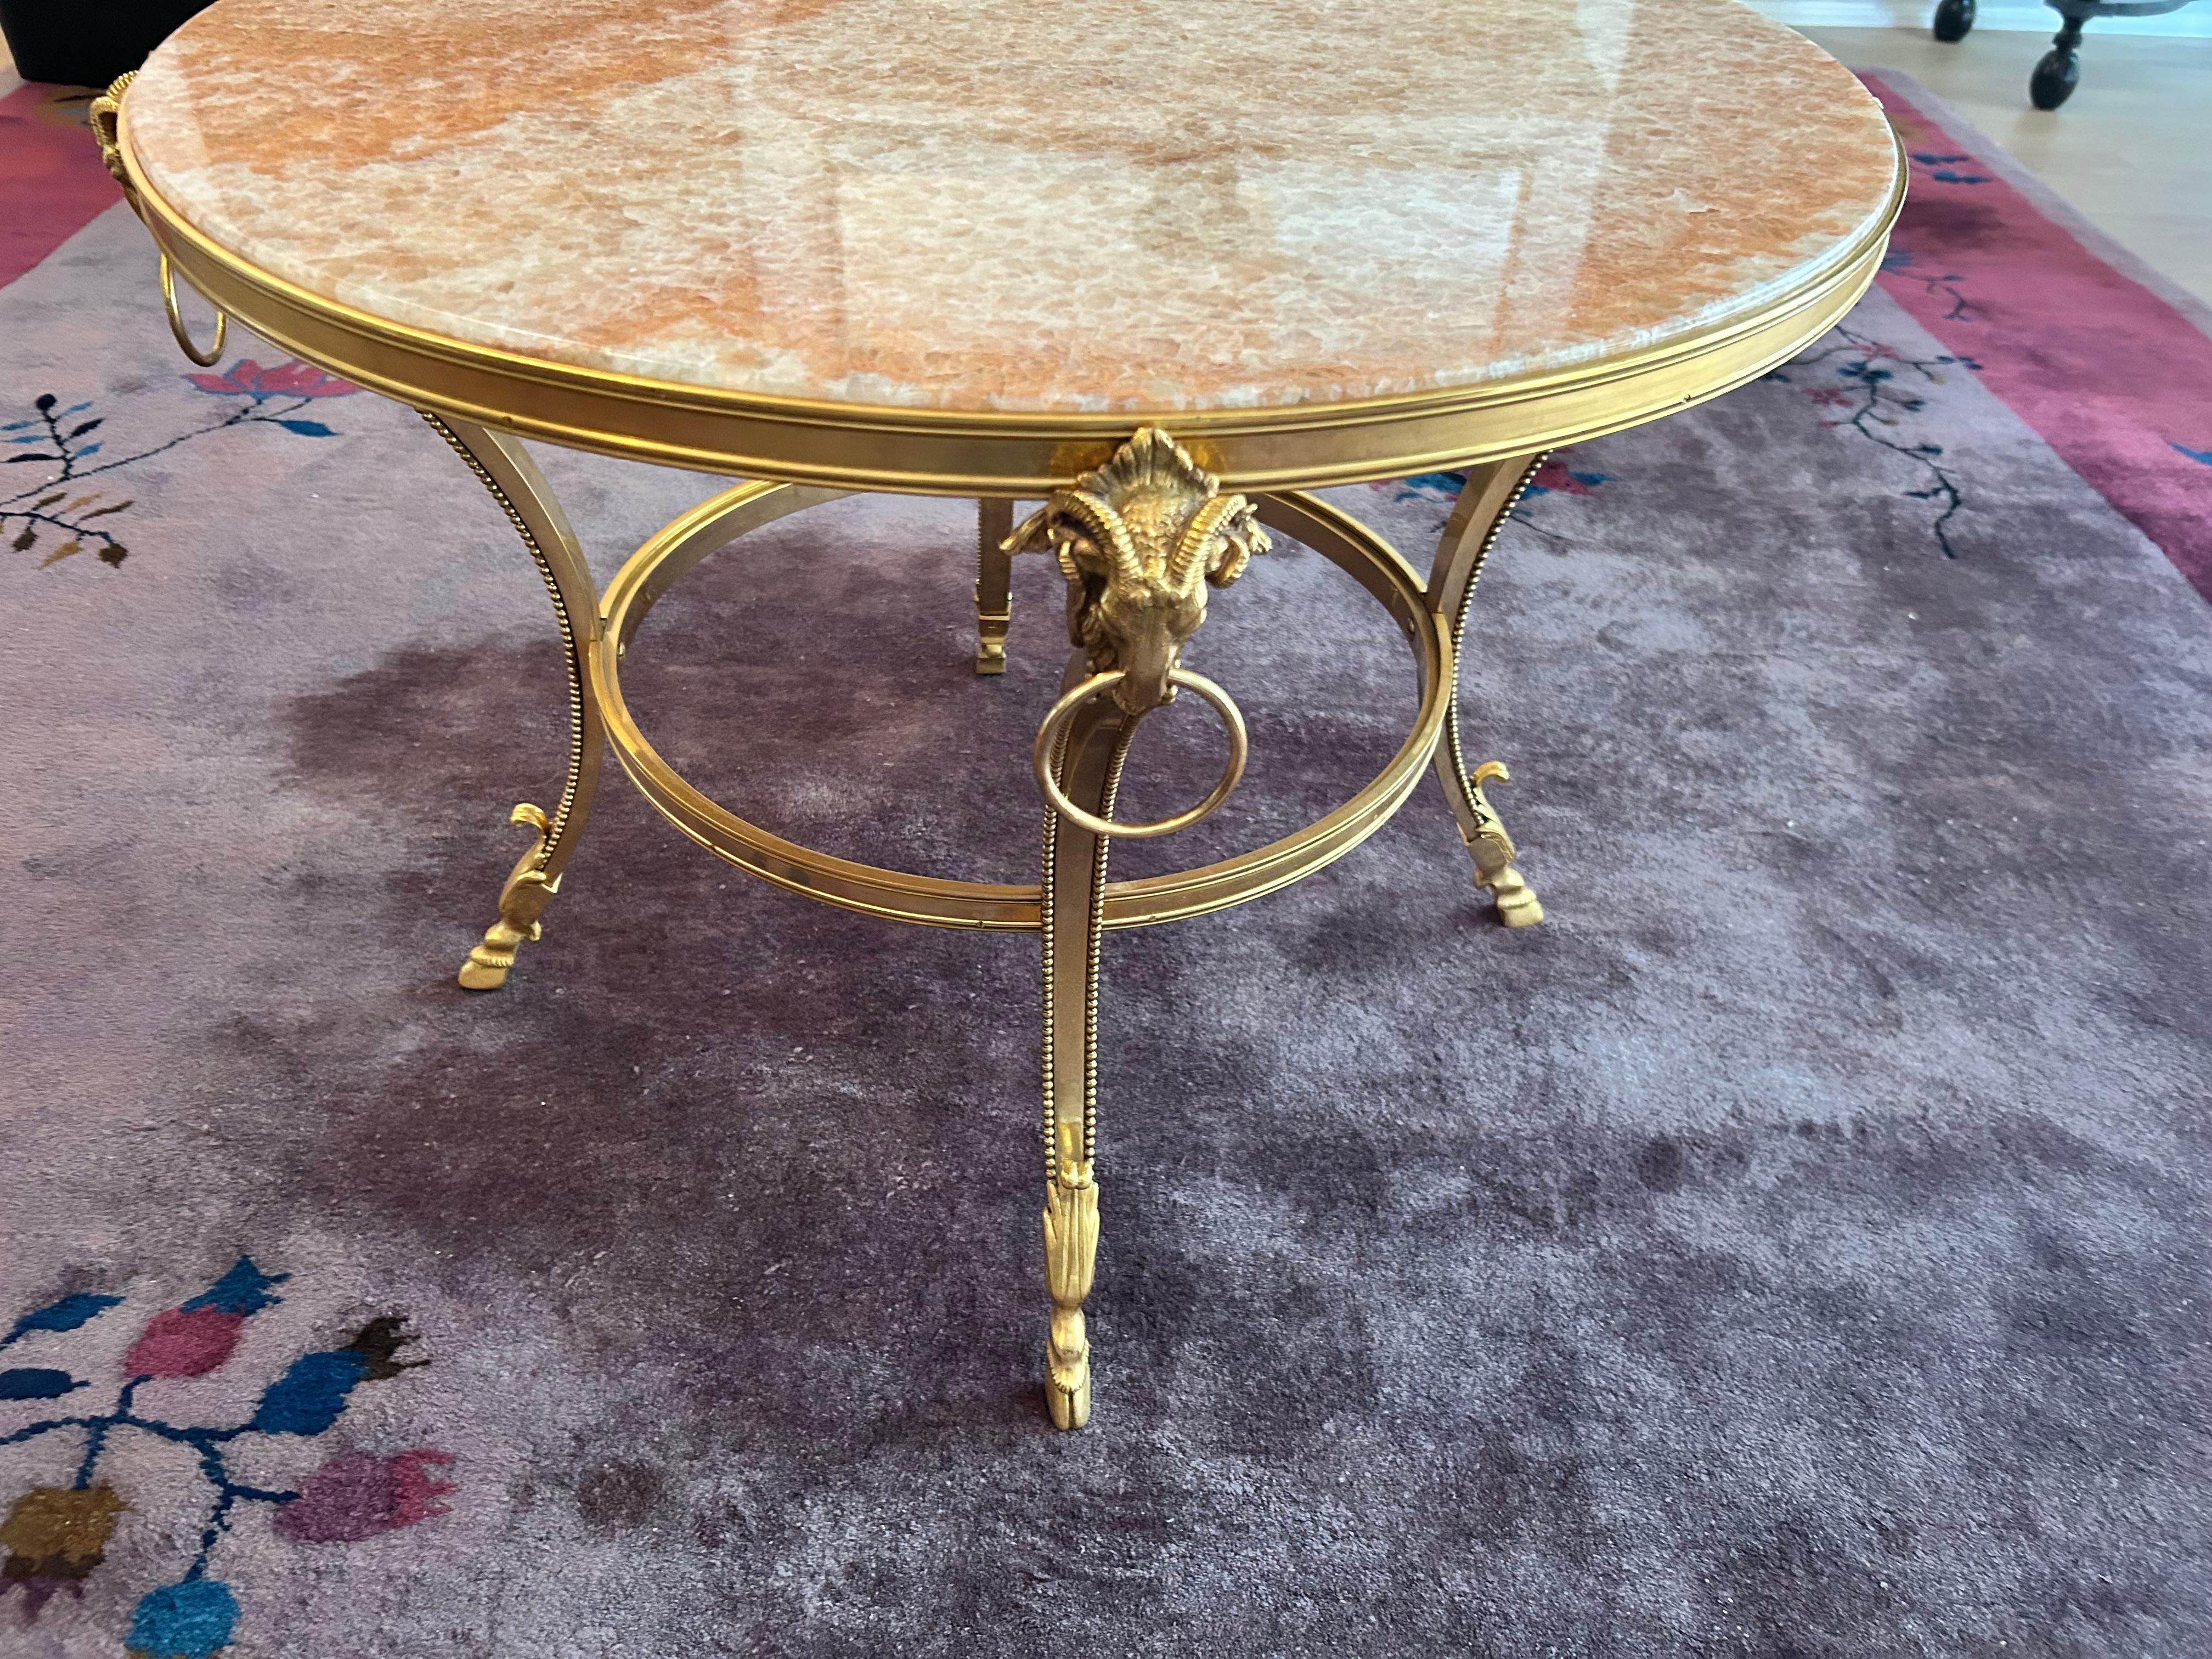 Beautiful Louis XIV style low pedestal table featuring a gilt bronze frame with concave legs terminating in rams' heads with rings, and  elegant hoof feet. The inset top is made of pink/coral onyx.
This table is in pristine condition and would make